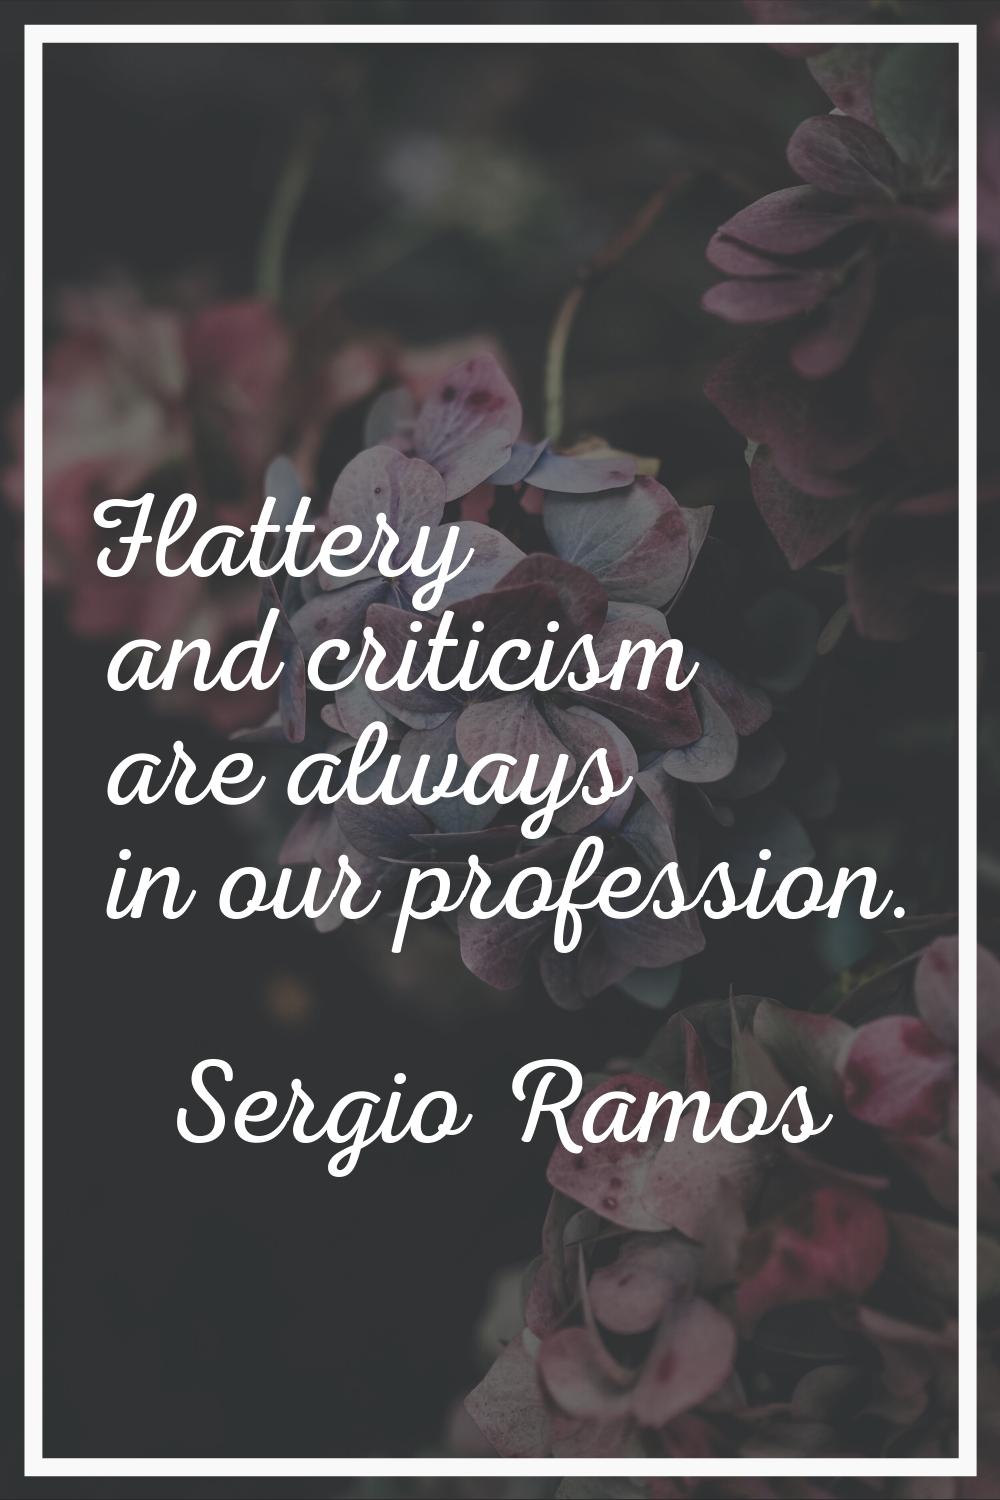 Flattery and criticism are always in our profession.